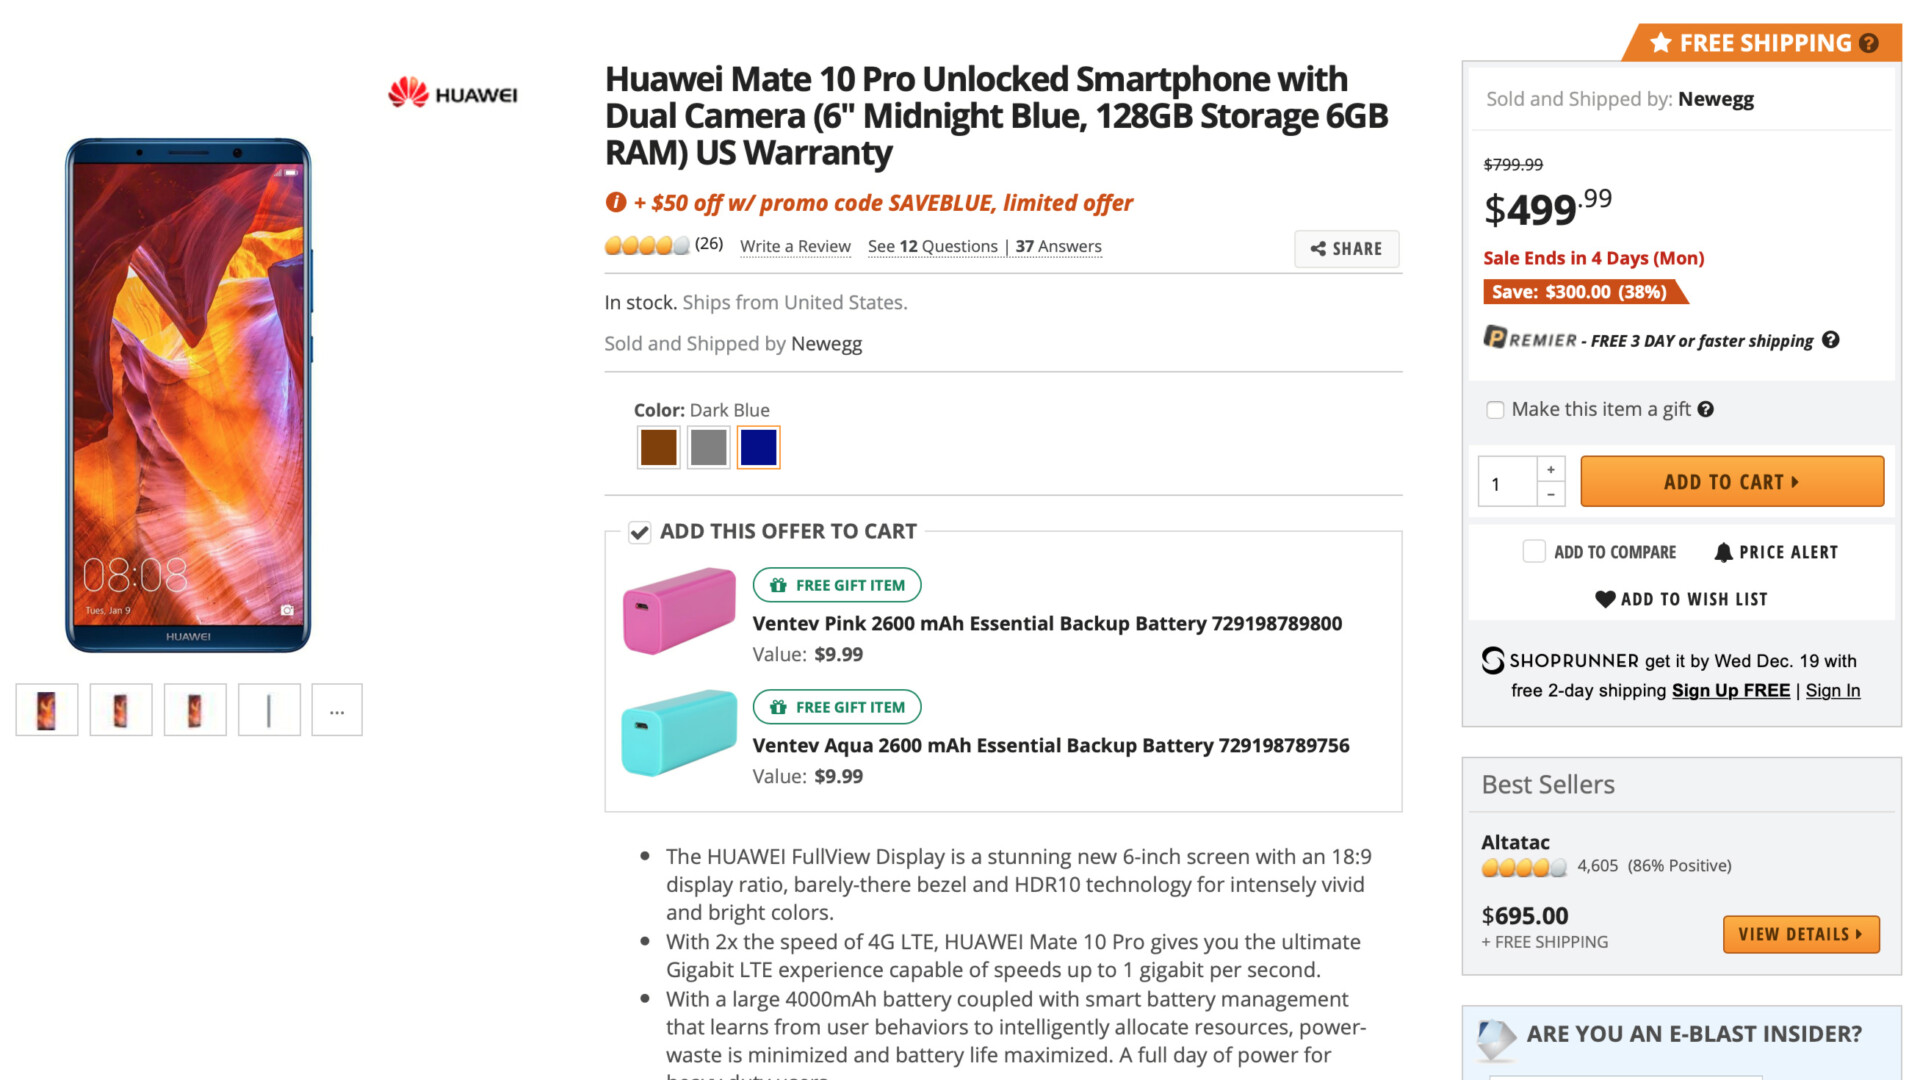 Deal on the Huawei Mate 10 Pro